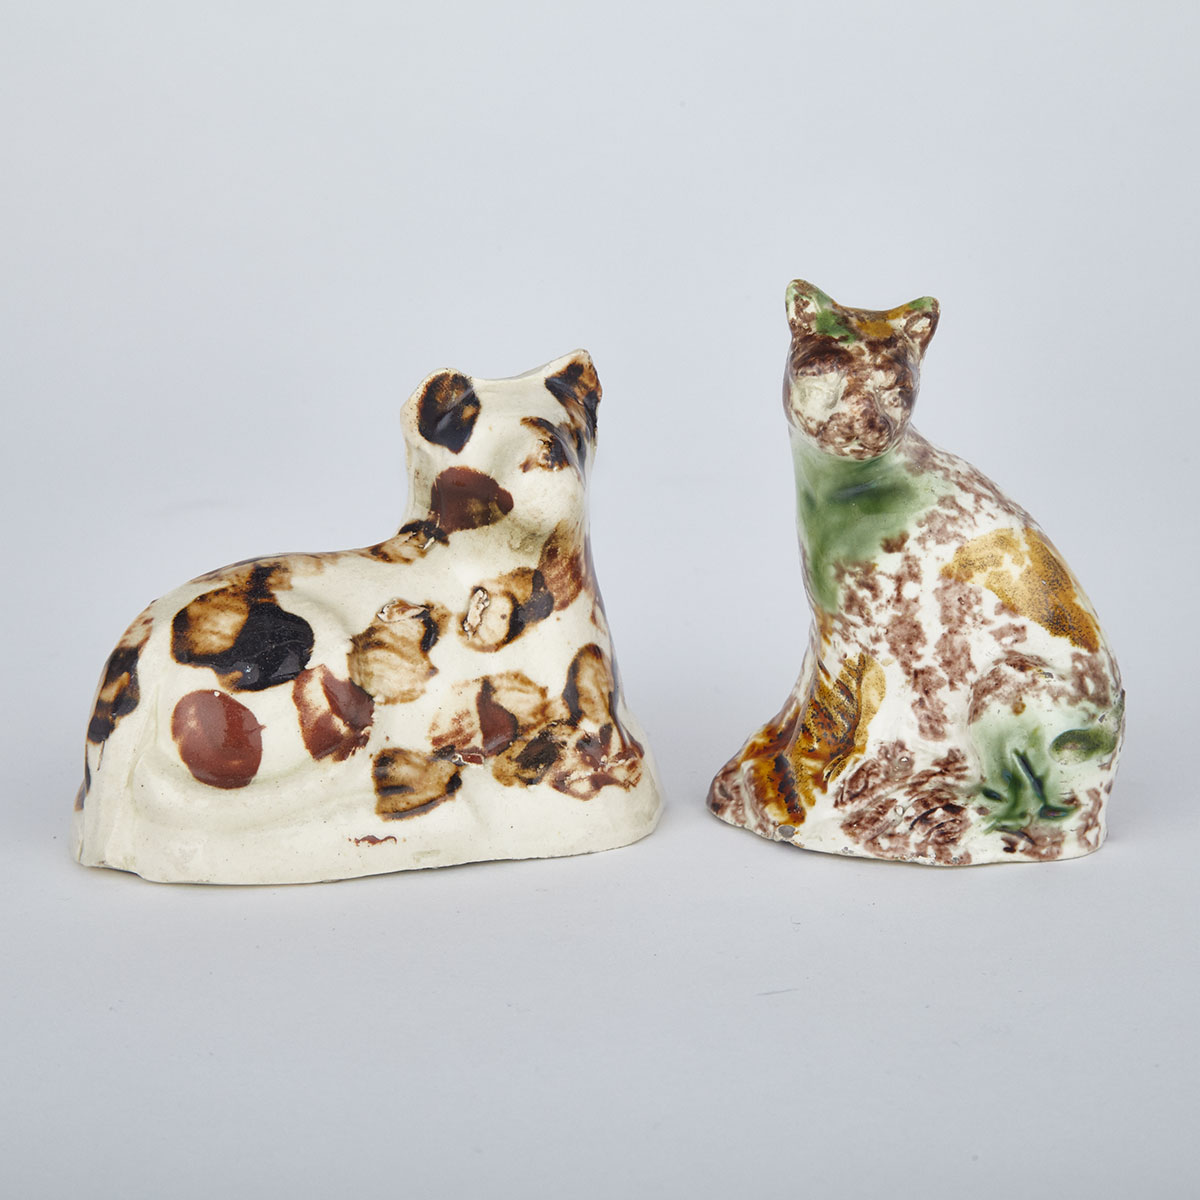 Bovey Tracey Creamware Model of a Cat and a Staffordshire Whieldon-Type Cat, late 18th century